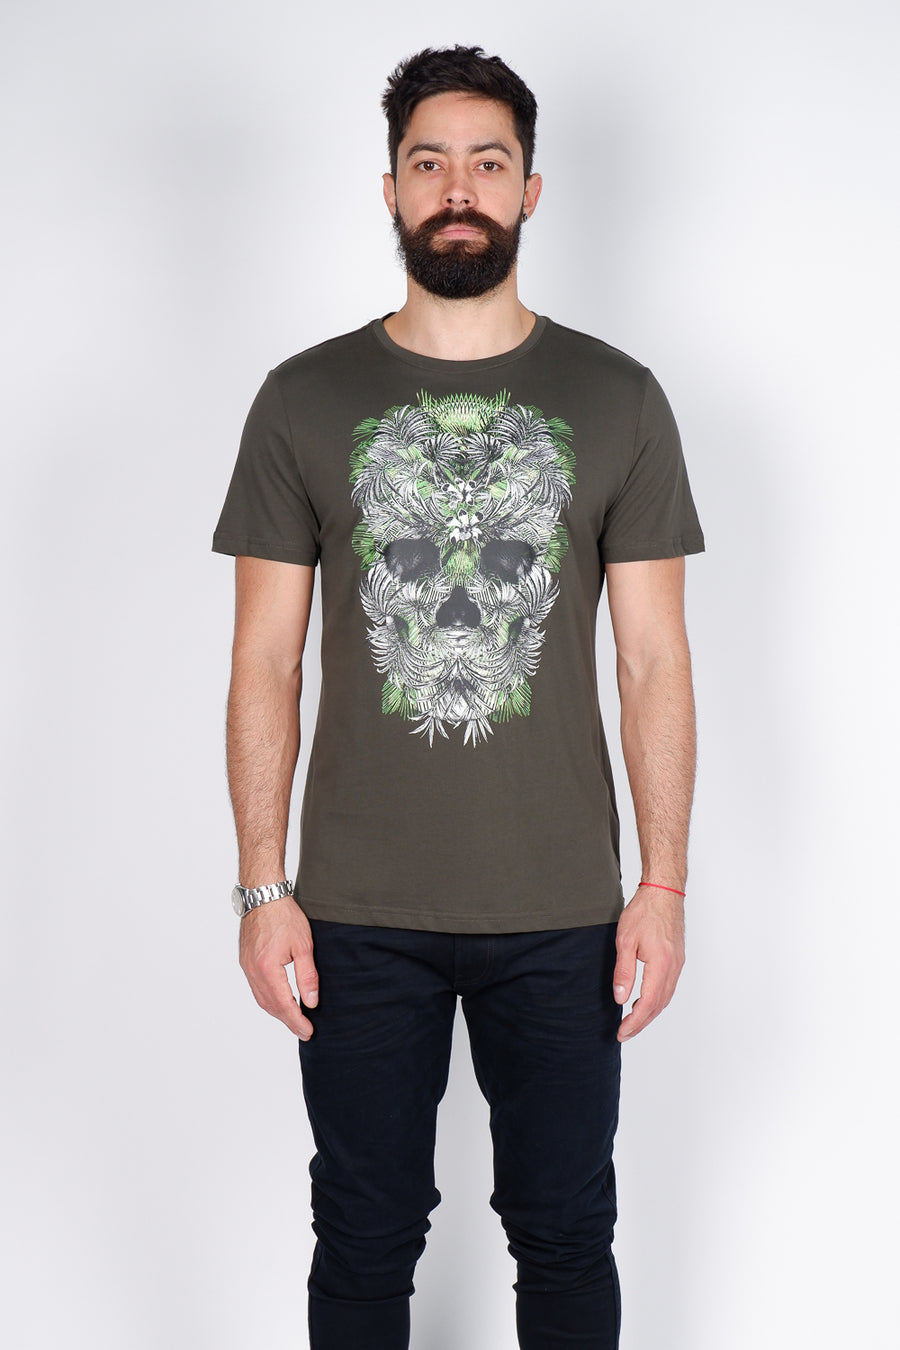 Buy the Antony Morato Skull Print Slim Fit T-Shirt Olive at Intro. Spend £50 for free UK delivery. Official stockists. We ship worldwide.